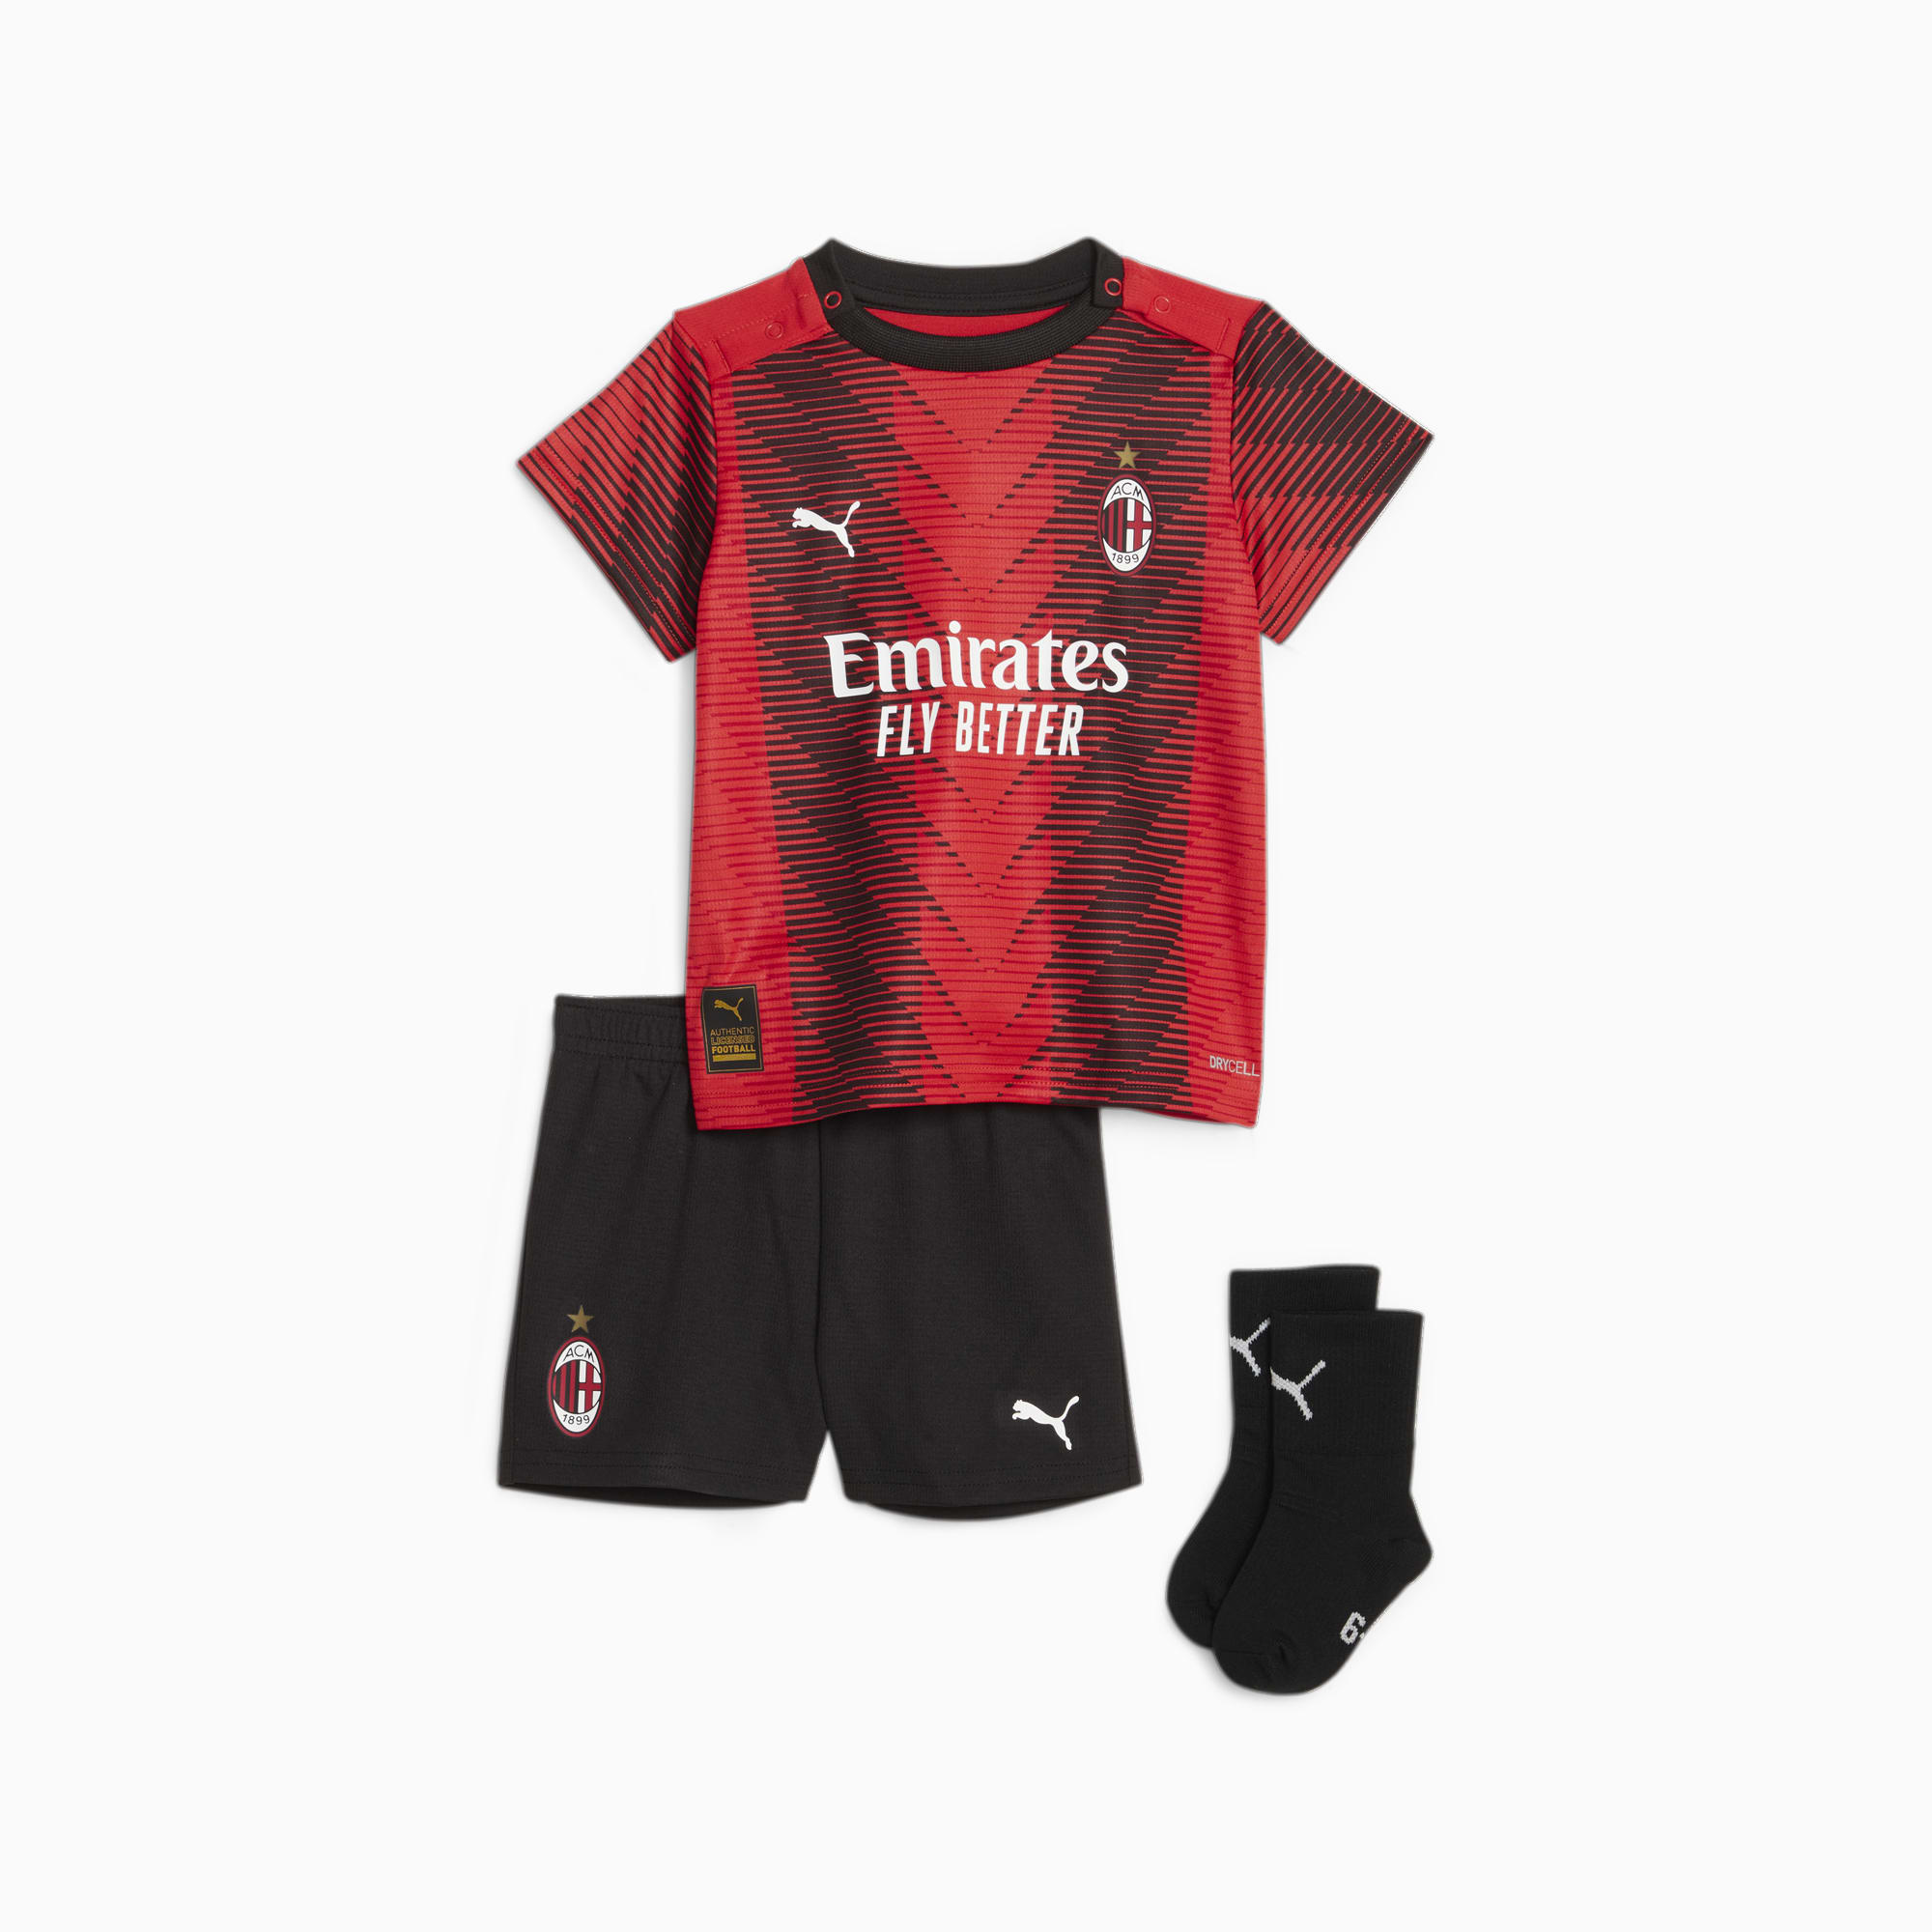 PUMA A.C. Milan 23/24 Home Baby Kit, For All Time Red/Black, Size 62, Clothing